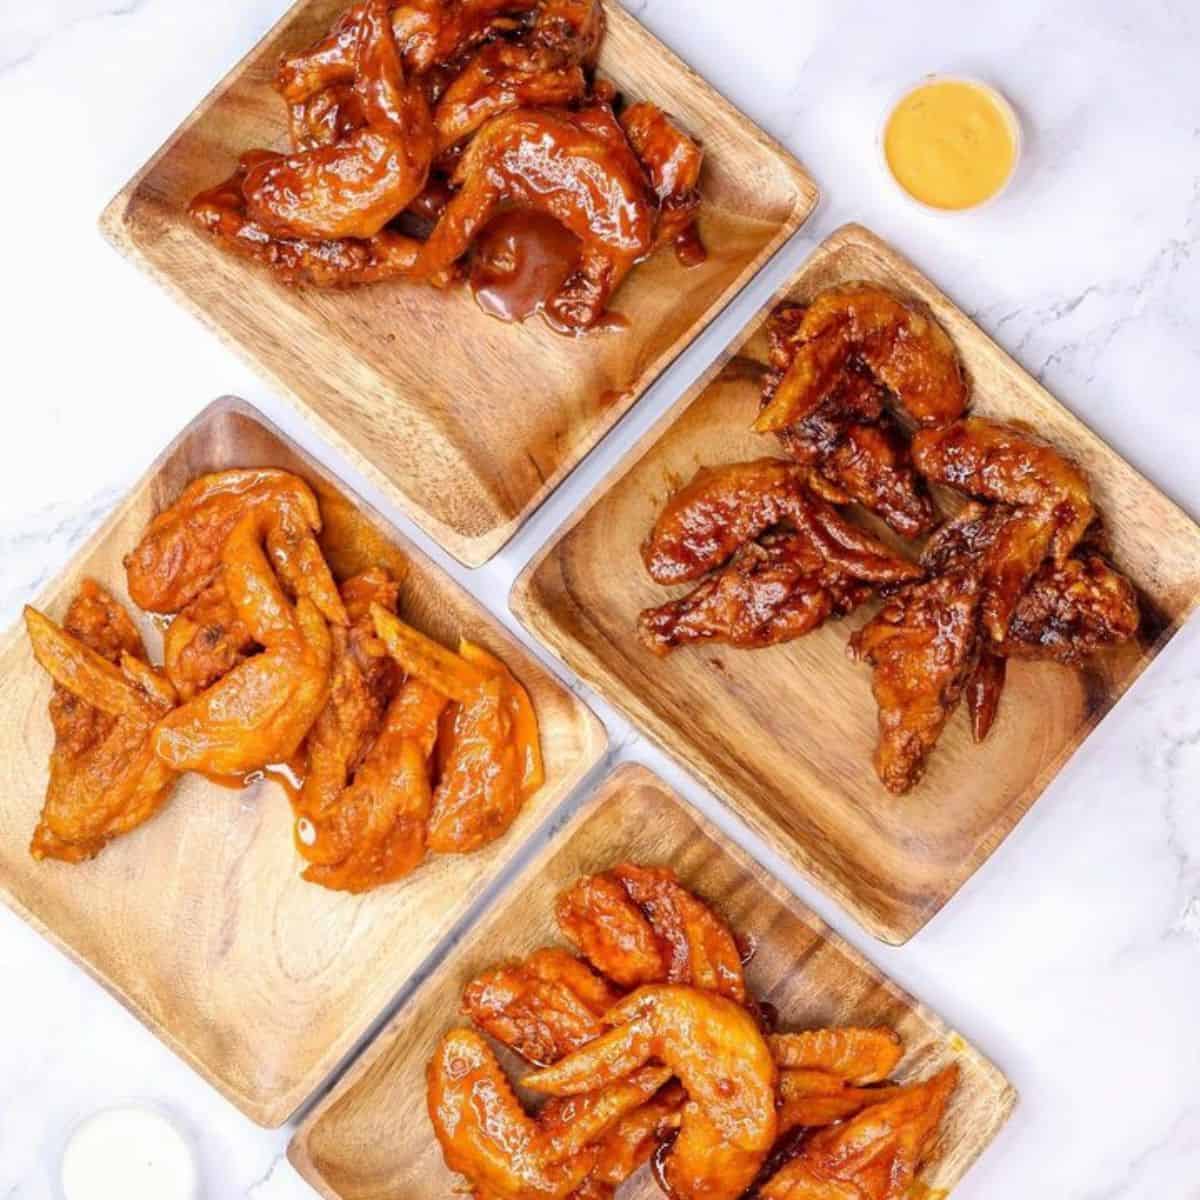 Four sets of glazed Chicken wings